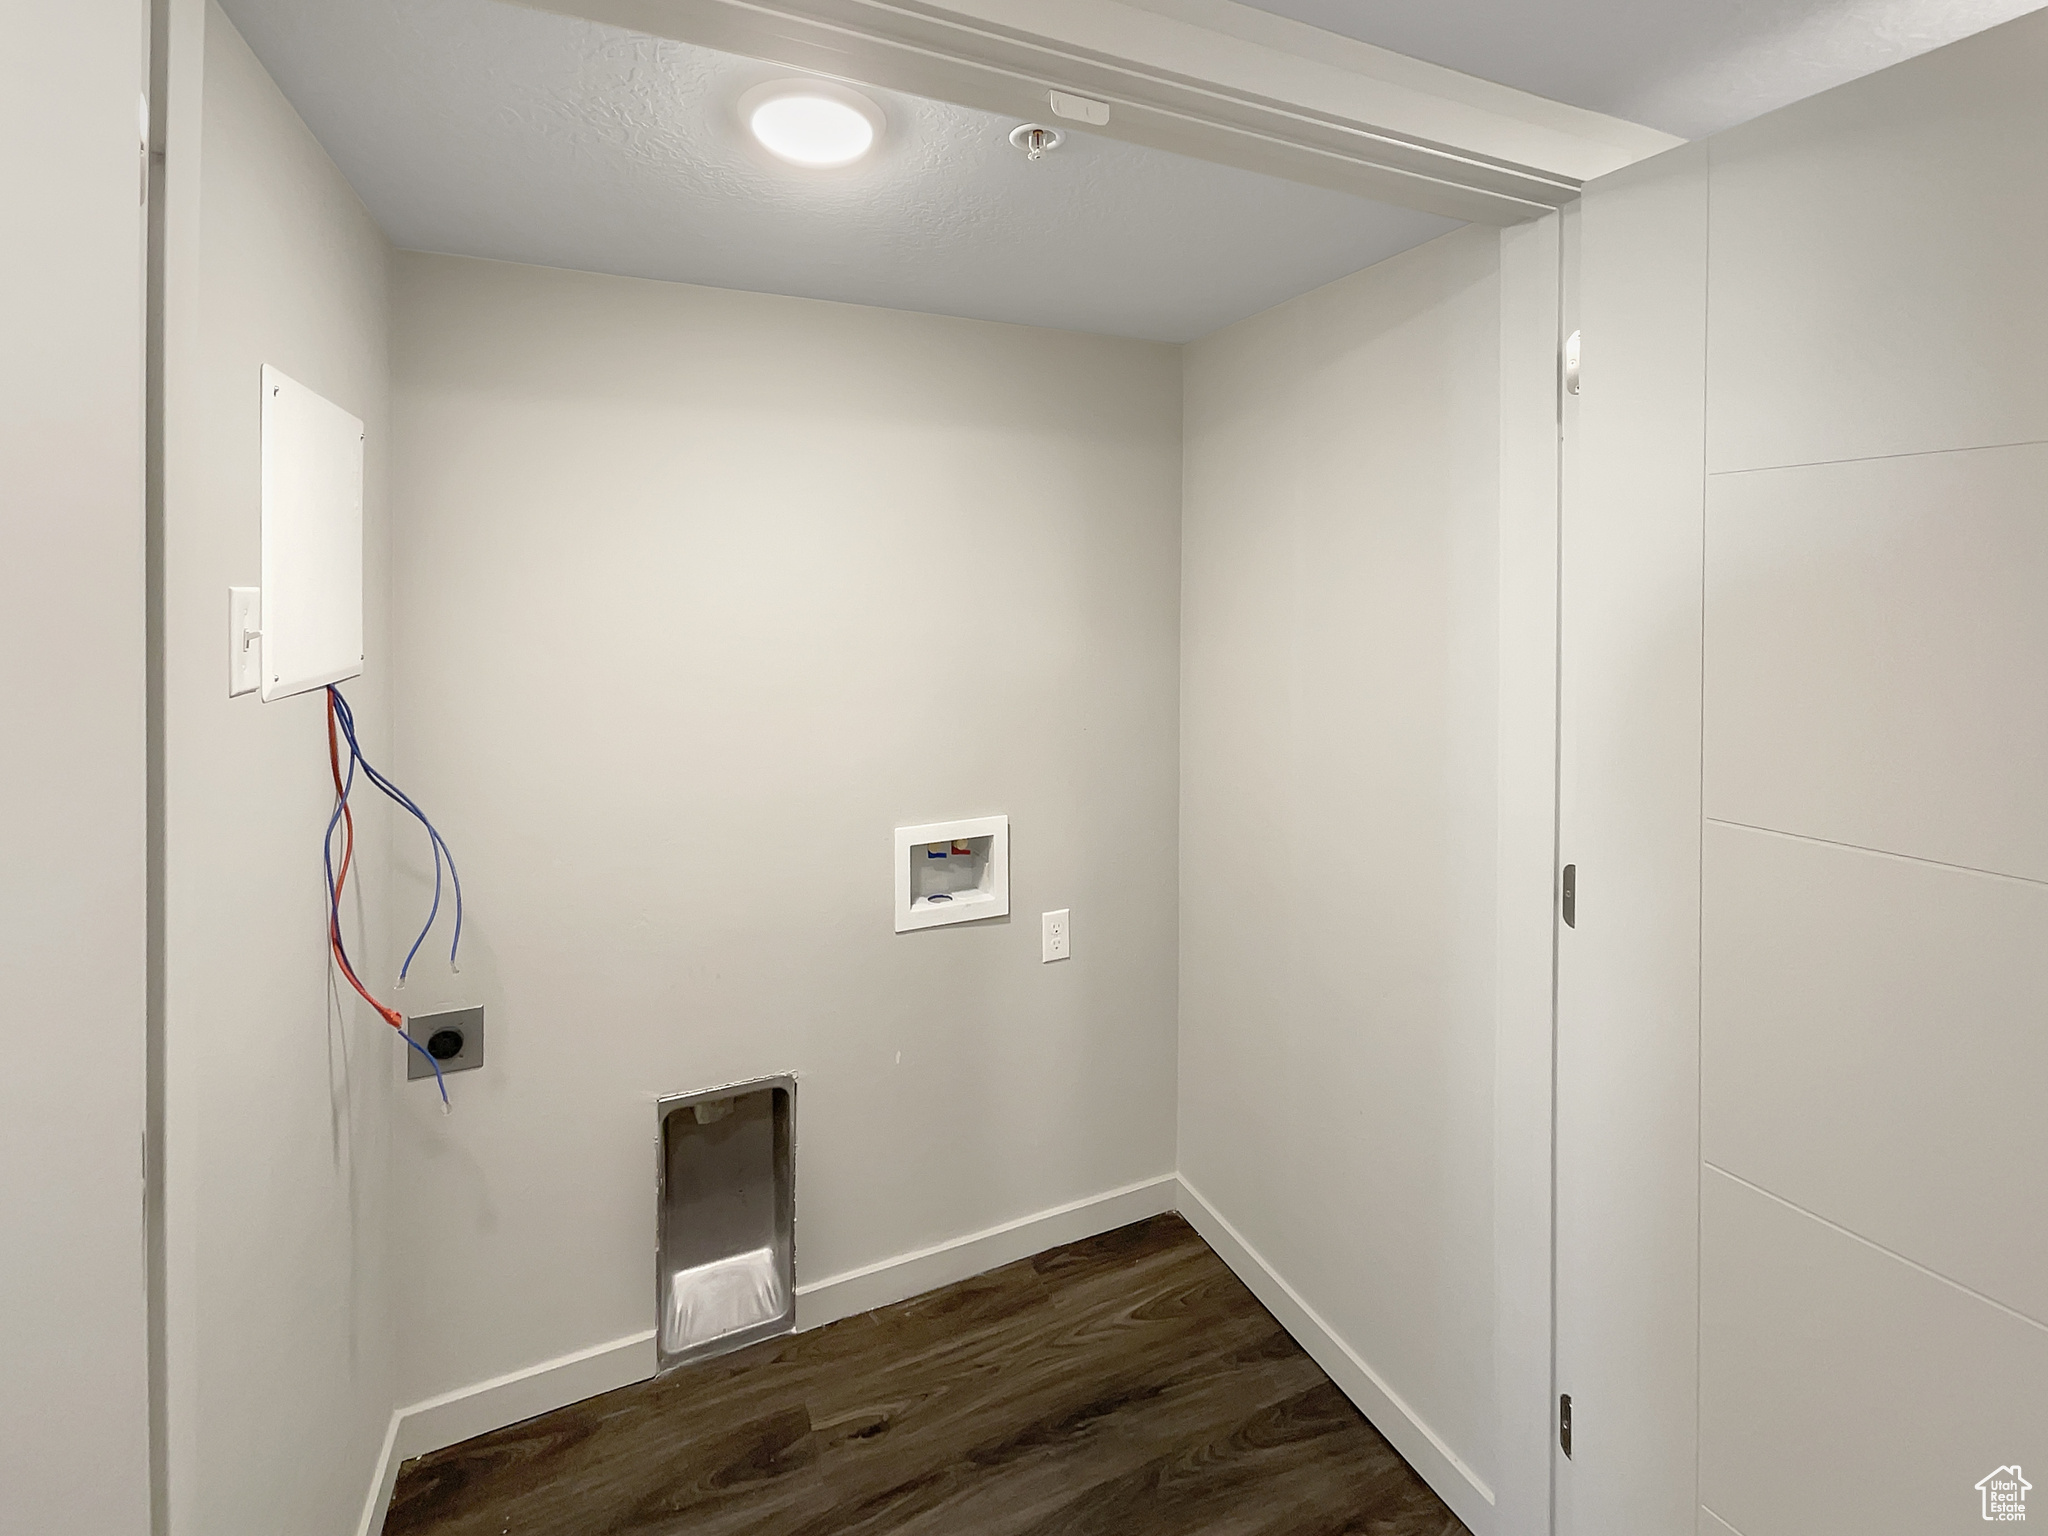 Laundry area with dark hardwood / wood-style flooring, hookup for an electric dryer, and hookup for a washing machine